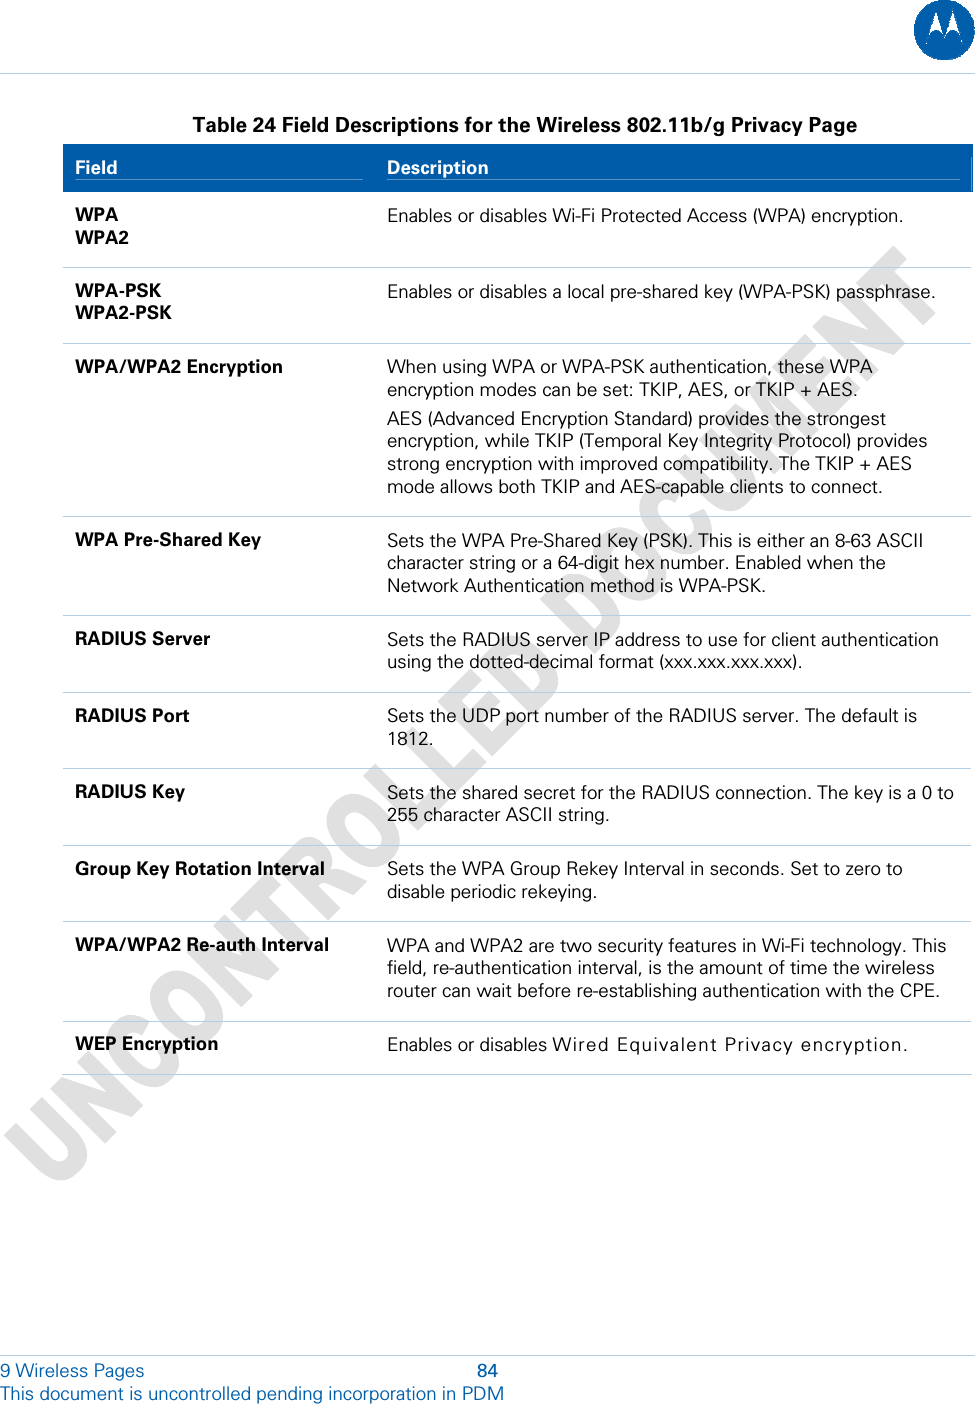  Table 24 Field Descriptions for the Wireless 802.11b/g Privacy Page Field   Description WPA WPA2 Enables or disables Wi-Fi Protected Access (WPA) encryption. WPA-PSK WPA2-PSK Enables or disables a local pre-shared key (WPA-PSK) passphrase. WPA/WPA2 Encryption  When using WPA or WPA-PSK authentication, these WPA encryption modes can be set: TKIP, AES, or TKIP + AES. AES (Advanced Encryption Standard) provides the strongest encryption, while TKIP (Temporal Key Integrity Protocol) provides strong encryption with improved compatibility. The TKIP + AES mode allows both TKIP and AES-capable clients to connect. WPA Pre-Shared Key  Sets the WPA Pre-Shared Key (PSK). This is either an 8-63 ASCII character string or a 64-digit hex number. Enabled when the Network Authentication method is WPA-PSK. RADIUS Server  Sets the RADIUS server IP address to use for client authentication using the dotted-decimal format (xxx.xxx.xxx.xxx). RADIUS Port  Sets the UDP port number of the RADIUS server. The default is 1812. RADIUS Key  Sets the shared secret for the RADIUS connection. The key is a 0 to 255 character ASCII string.  Group Key Rotation Interval  Sets the WPA Group Rekey Interval in seconds. Set to zero to disable periodic rekeying. WPA/WPA2 Re-auth Interval  WPA and WPA2 are two security features in Wi-Fi technology. This field, re-authentication interval, is the amount of time the wireless router can wait before re-establishing authentication with the CPE. WEP Encryption  Enables or disables Wired Equivalent Privacy encryption.  9 Wireless Pages  84 This document is uncontrolled pending incorporation in PDM  